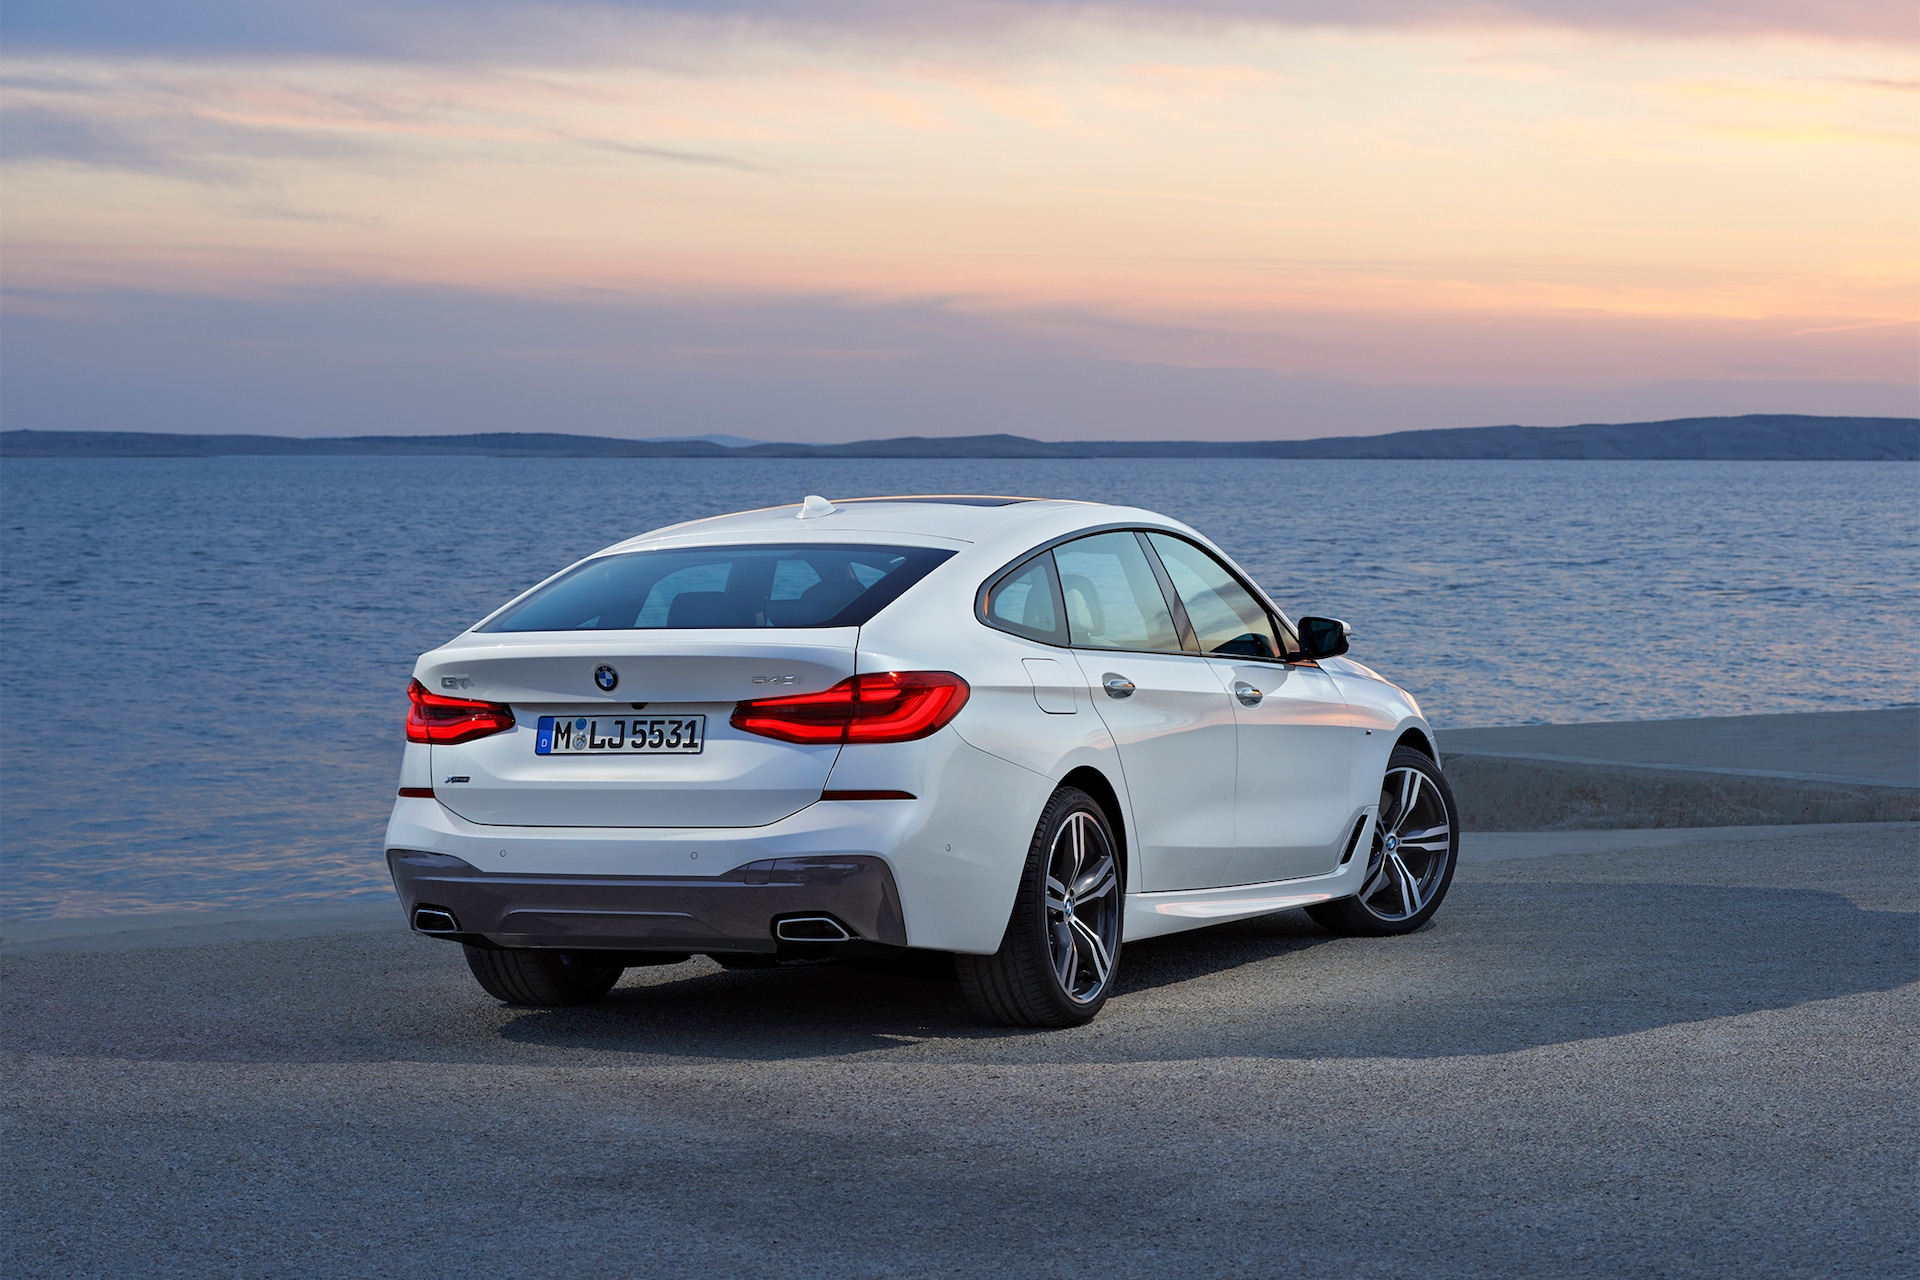 2018 BMW 640i xDrive Gran Turismo Picks up Where the 5 GT Left Off